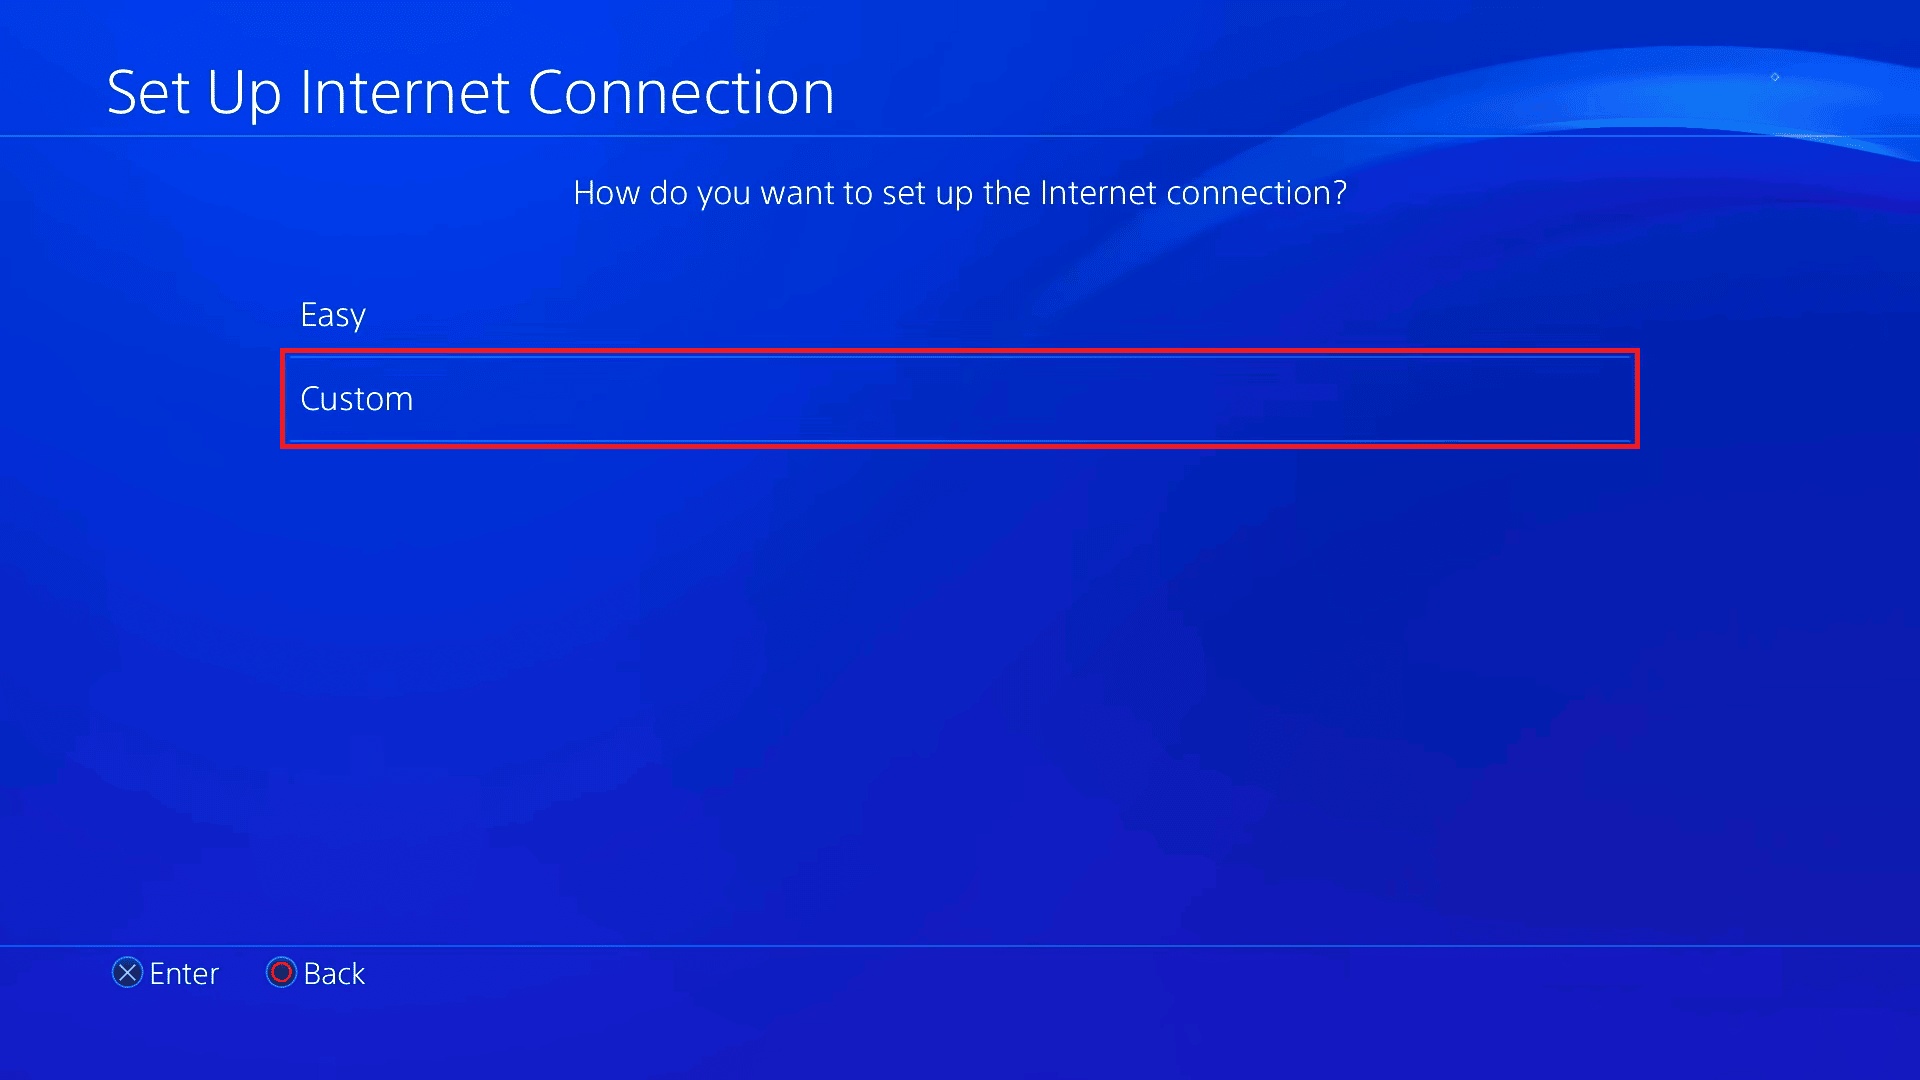 select Custom to set up internet connection